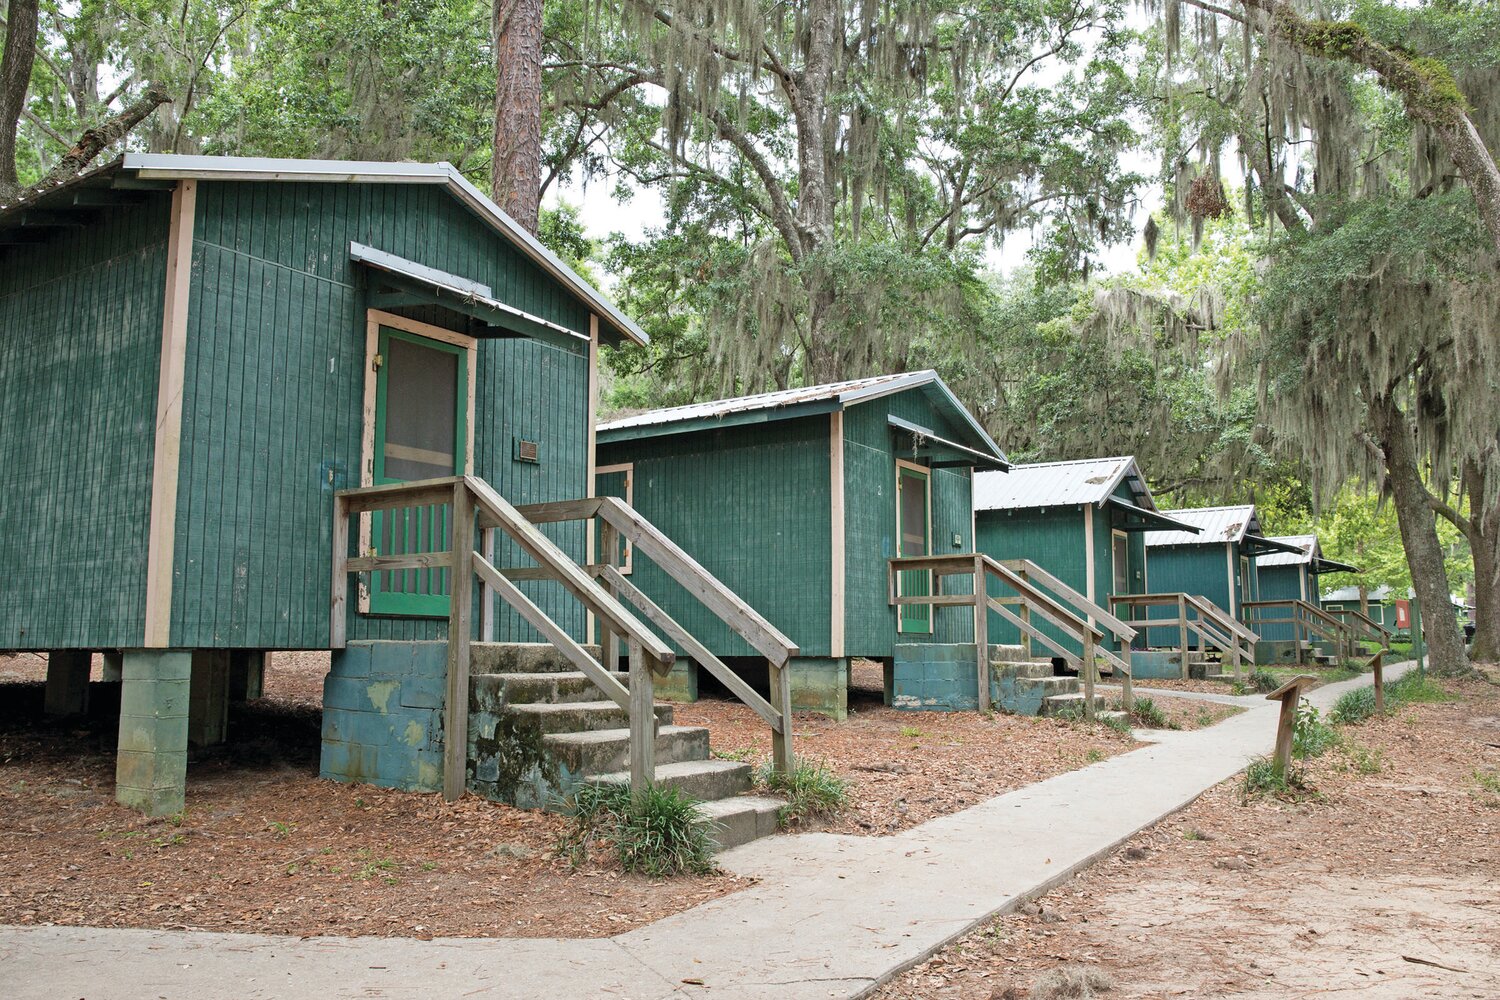 Historic cabins at Florida 4-H Camp Cherry Lake in 2019 before they were removed.